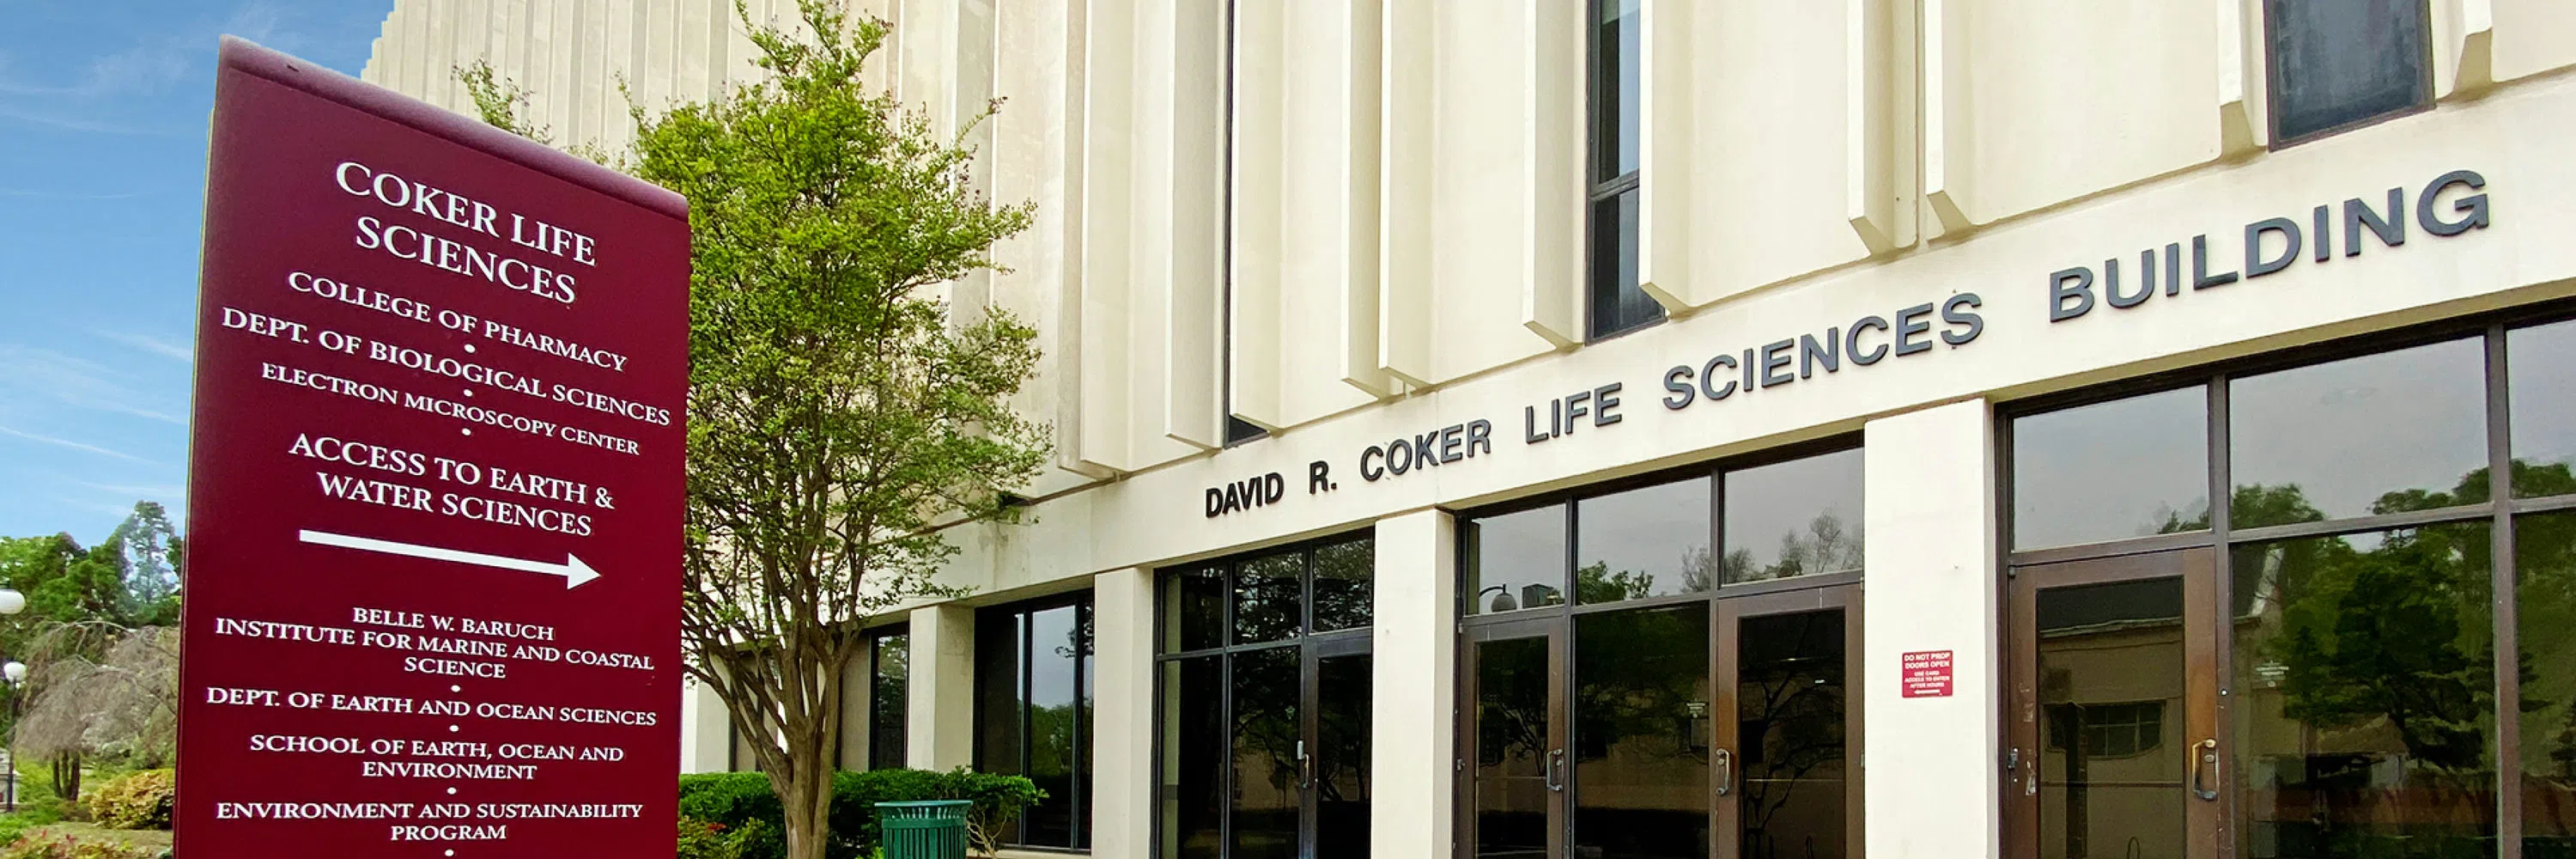 View of the front of the Coker Life Sciences Building during the day